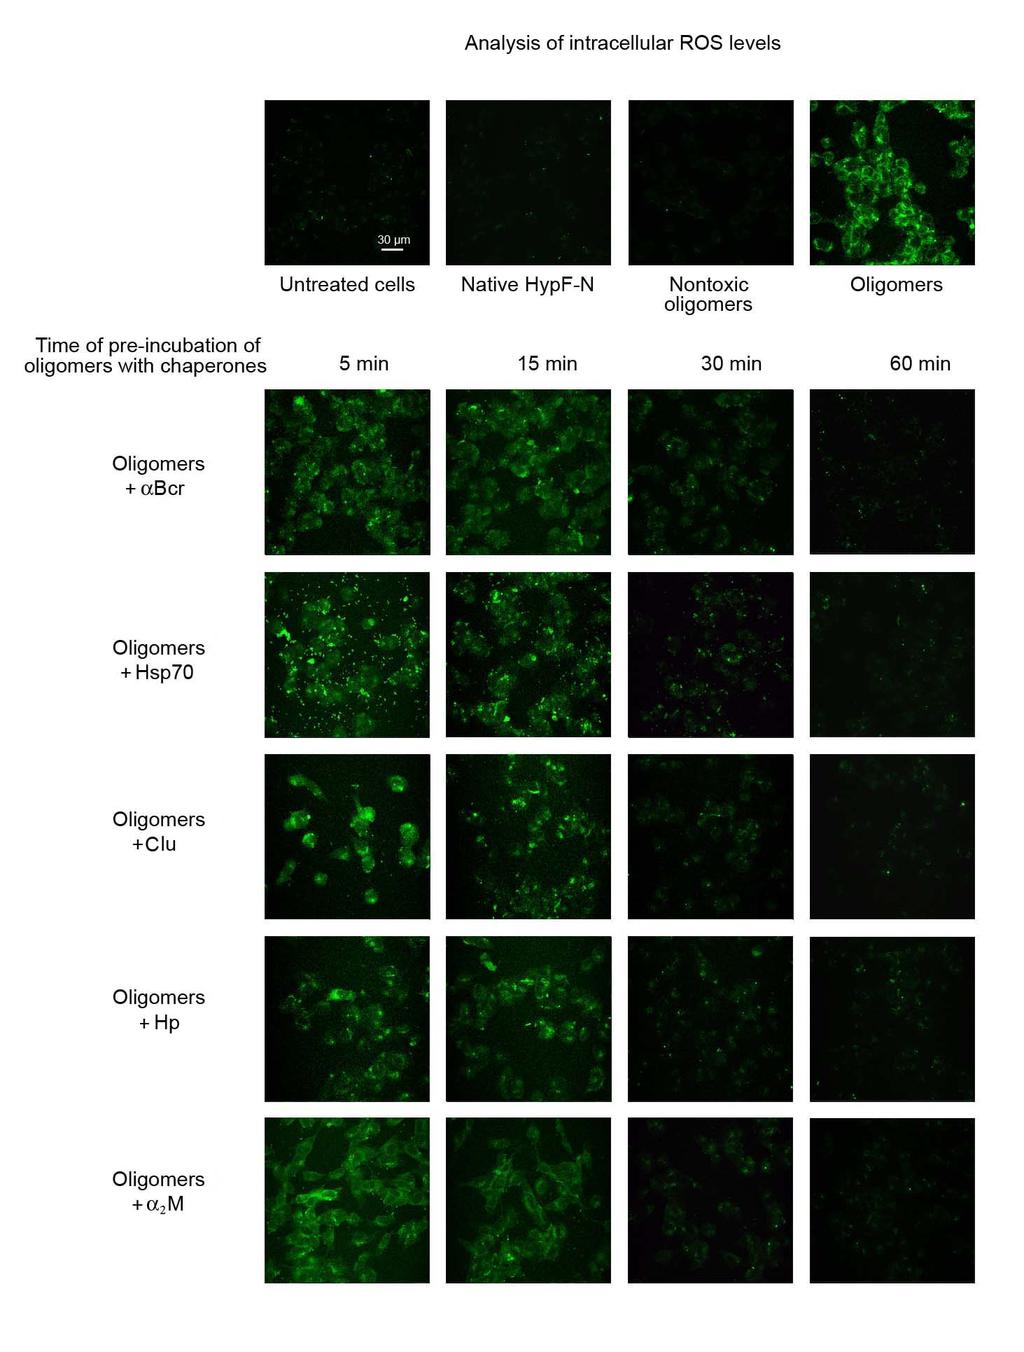 Fig. S5. Representative confocal scanning microscope images of SH-SY5Y showing intracellular ROS levels.